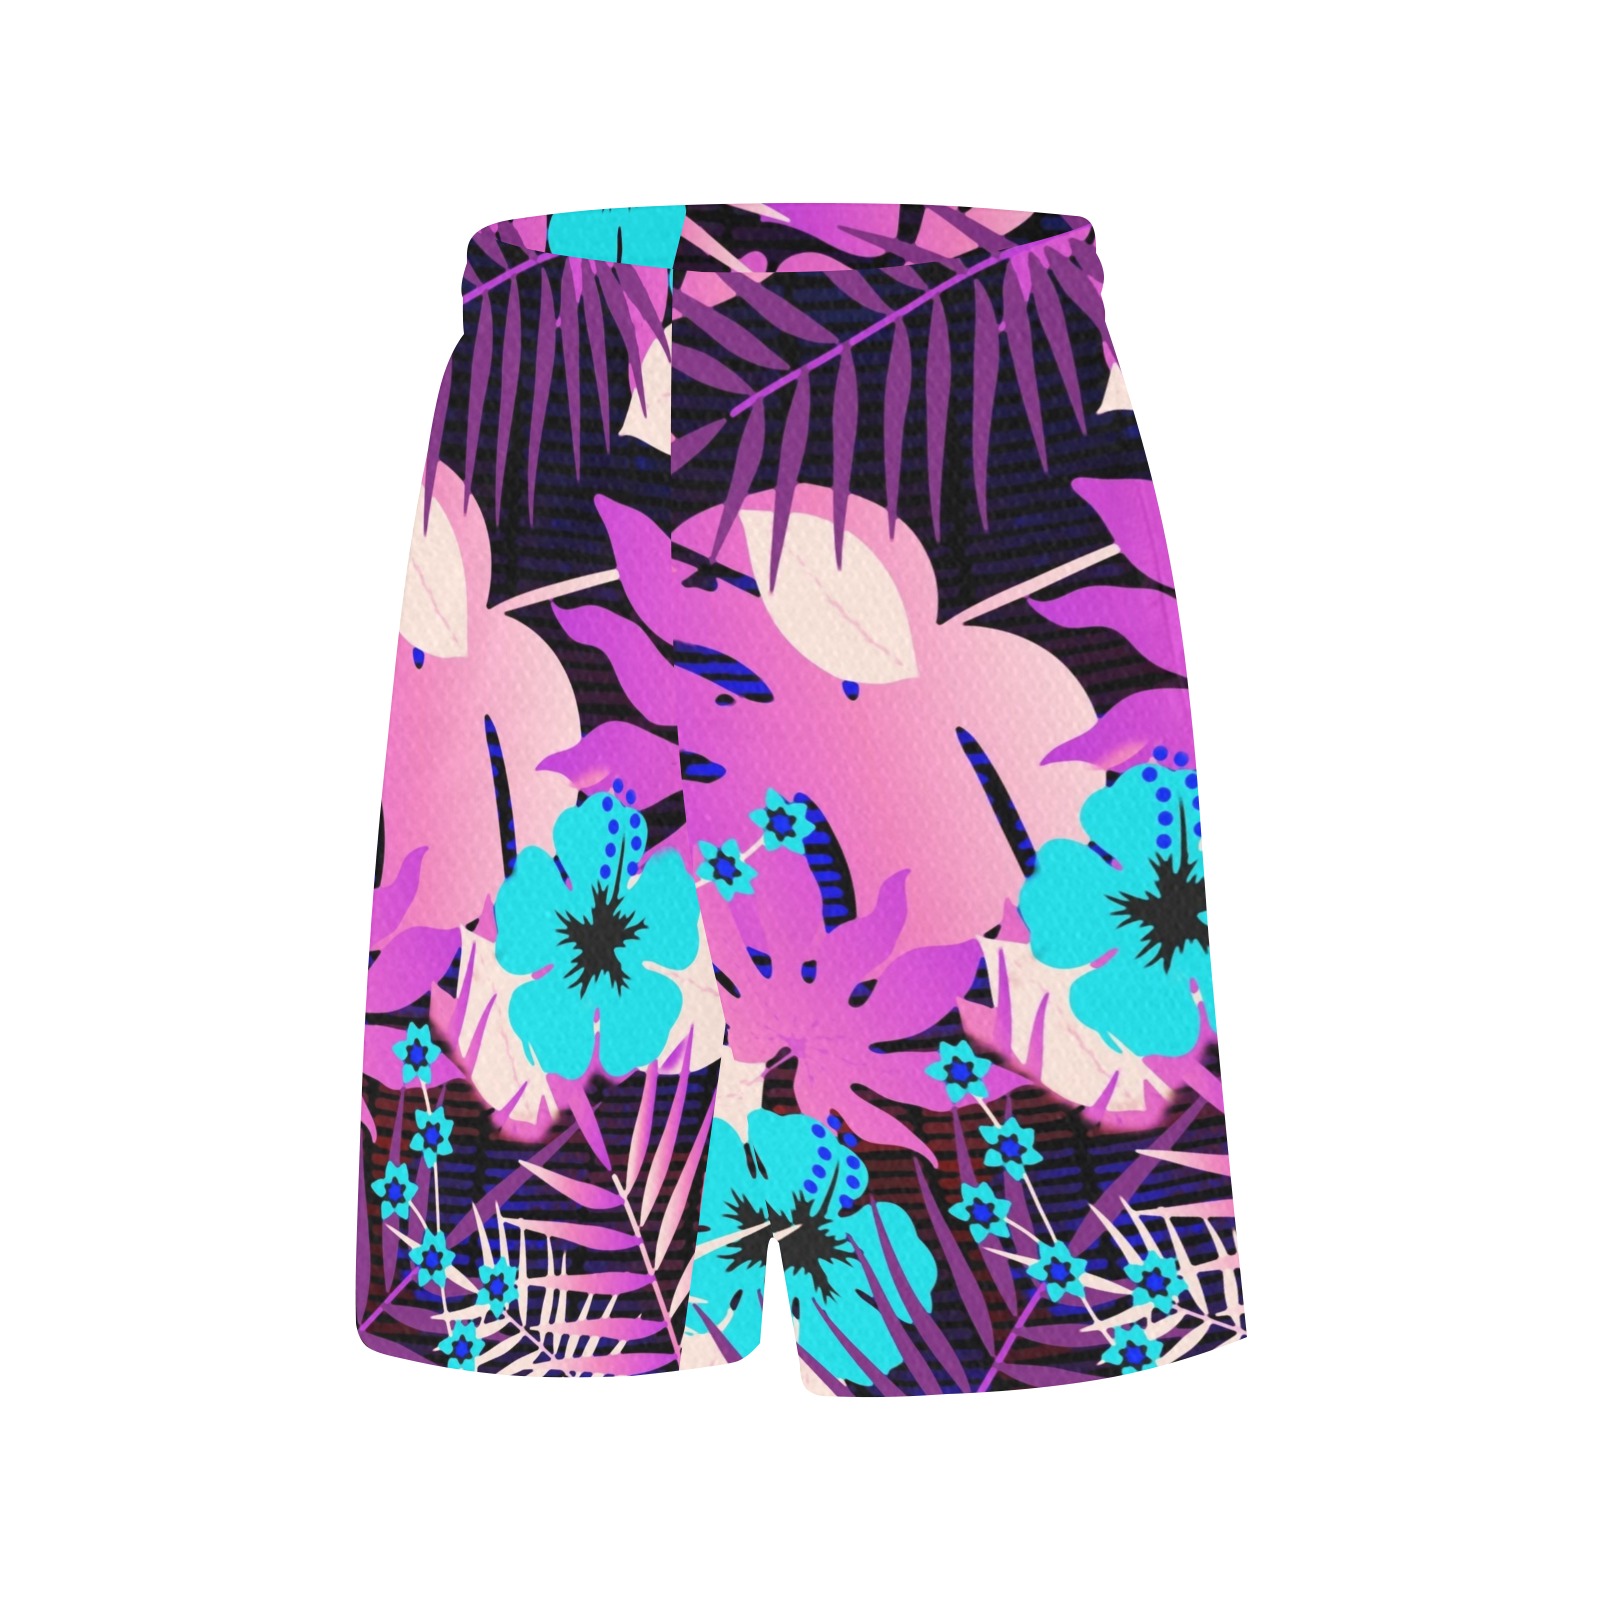 GROOVY FUNK THING FLORAL PURPLE All Over Print Basketball Shorts with Pocket